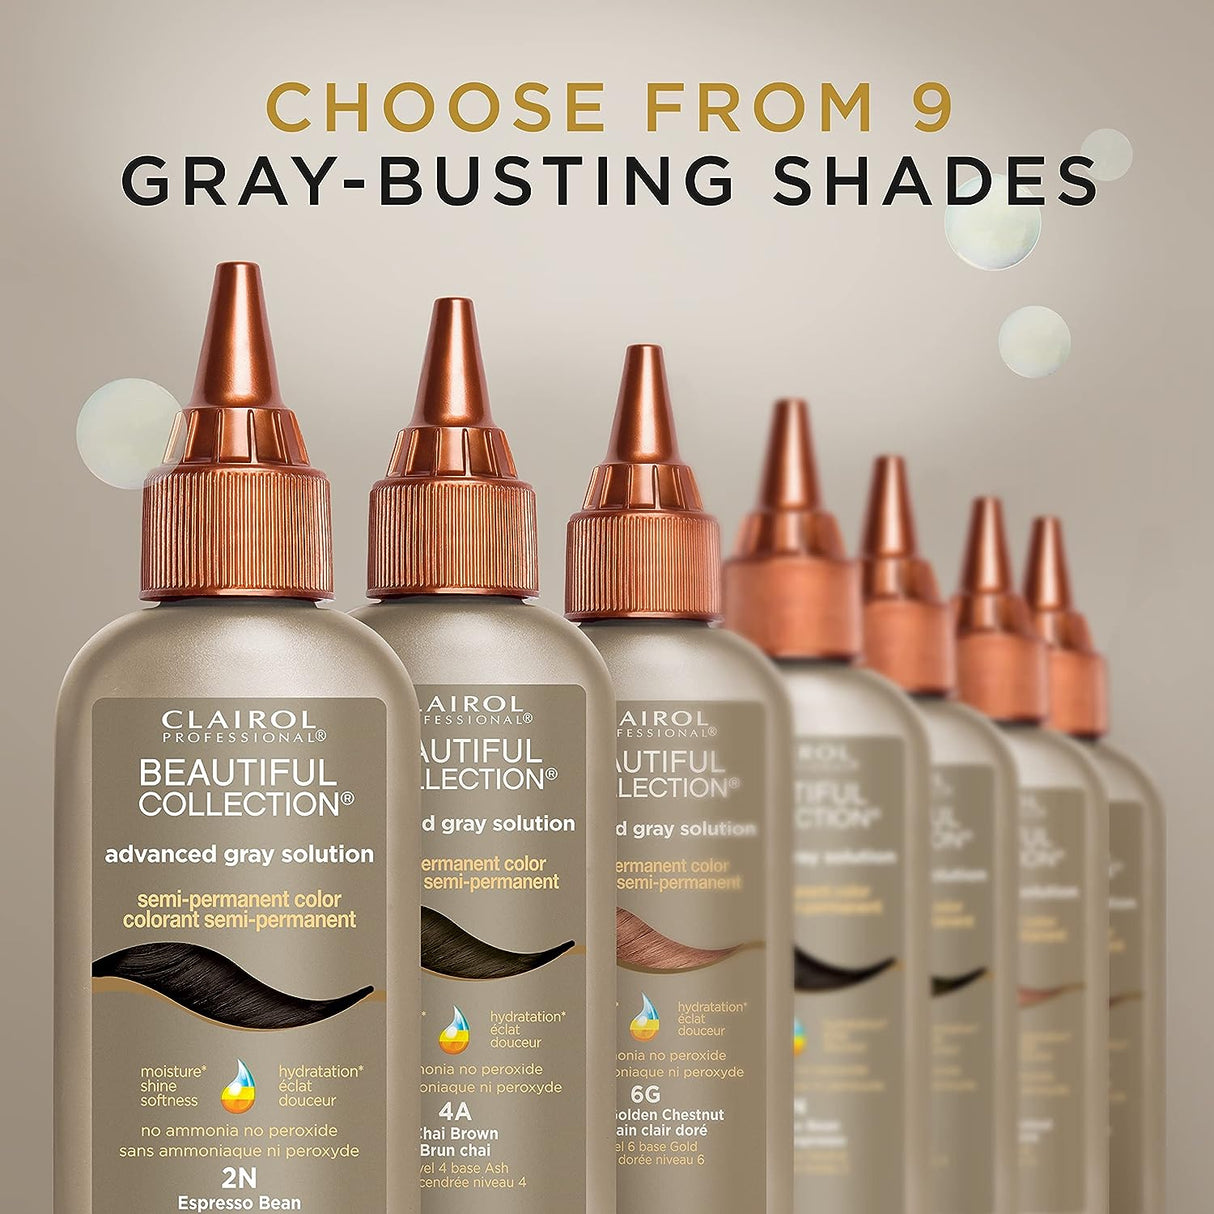 Clairol Professional® Beautiful Advanced Gray Solutions, (4R) Semi-Permanent Hair Color for Gray Coverage